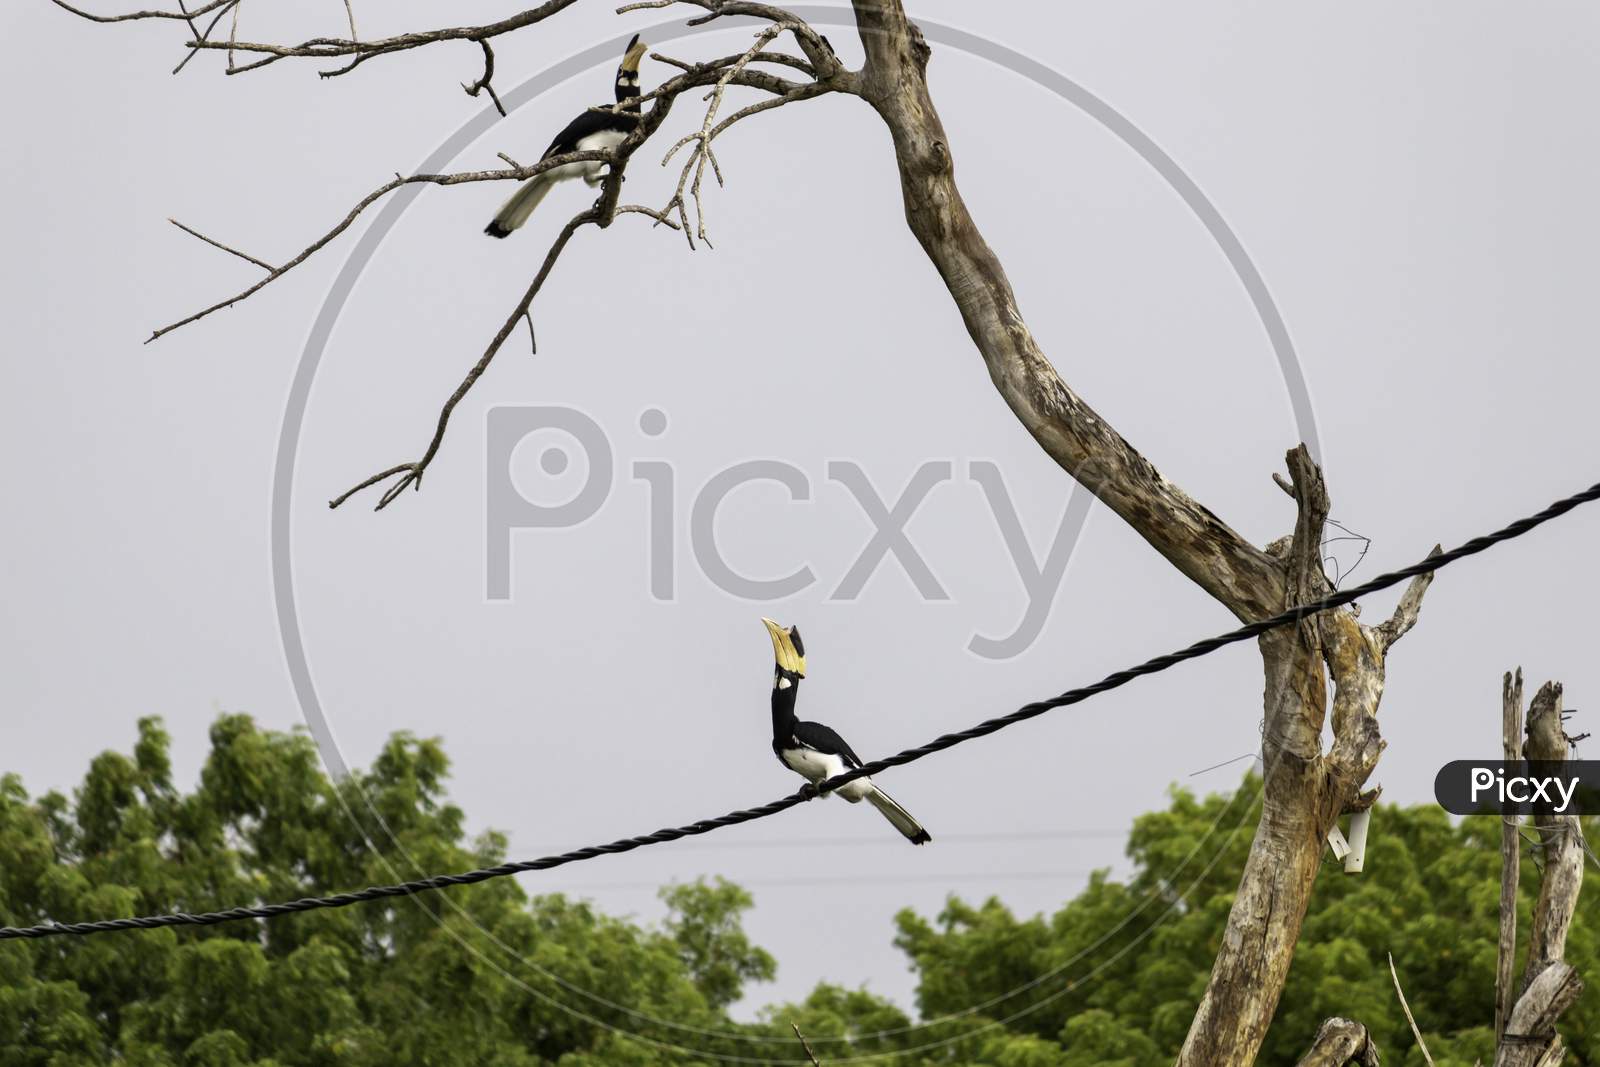 Great Hornbill Bird On A Cable About To Jump